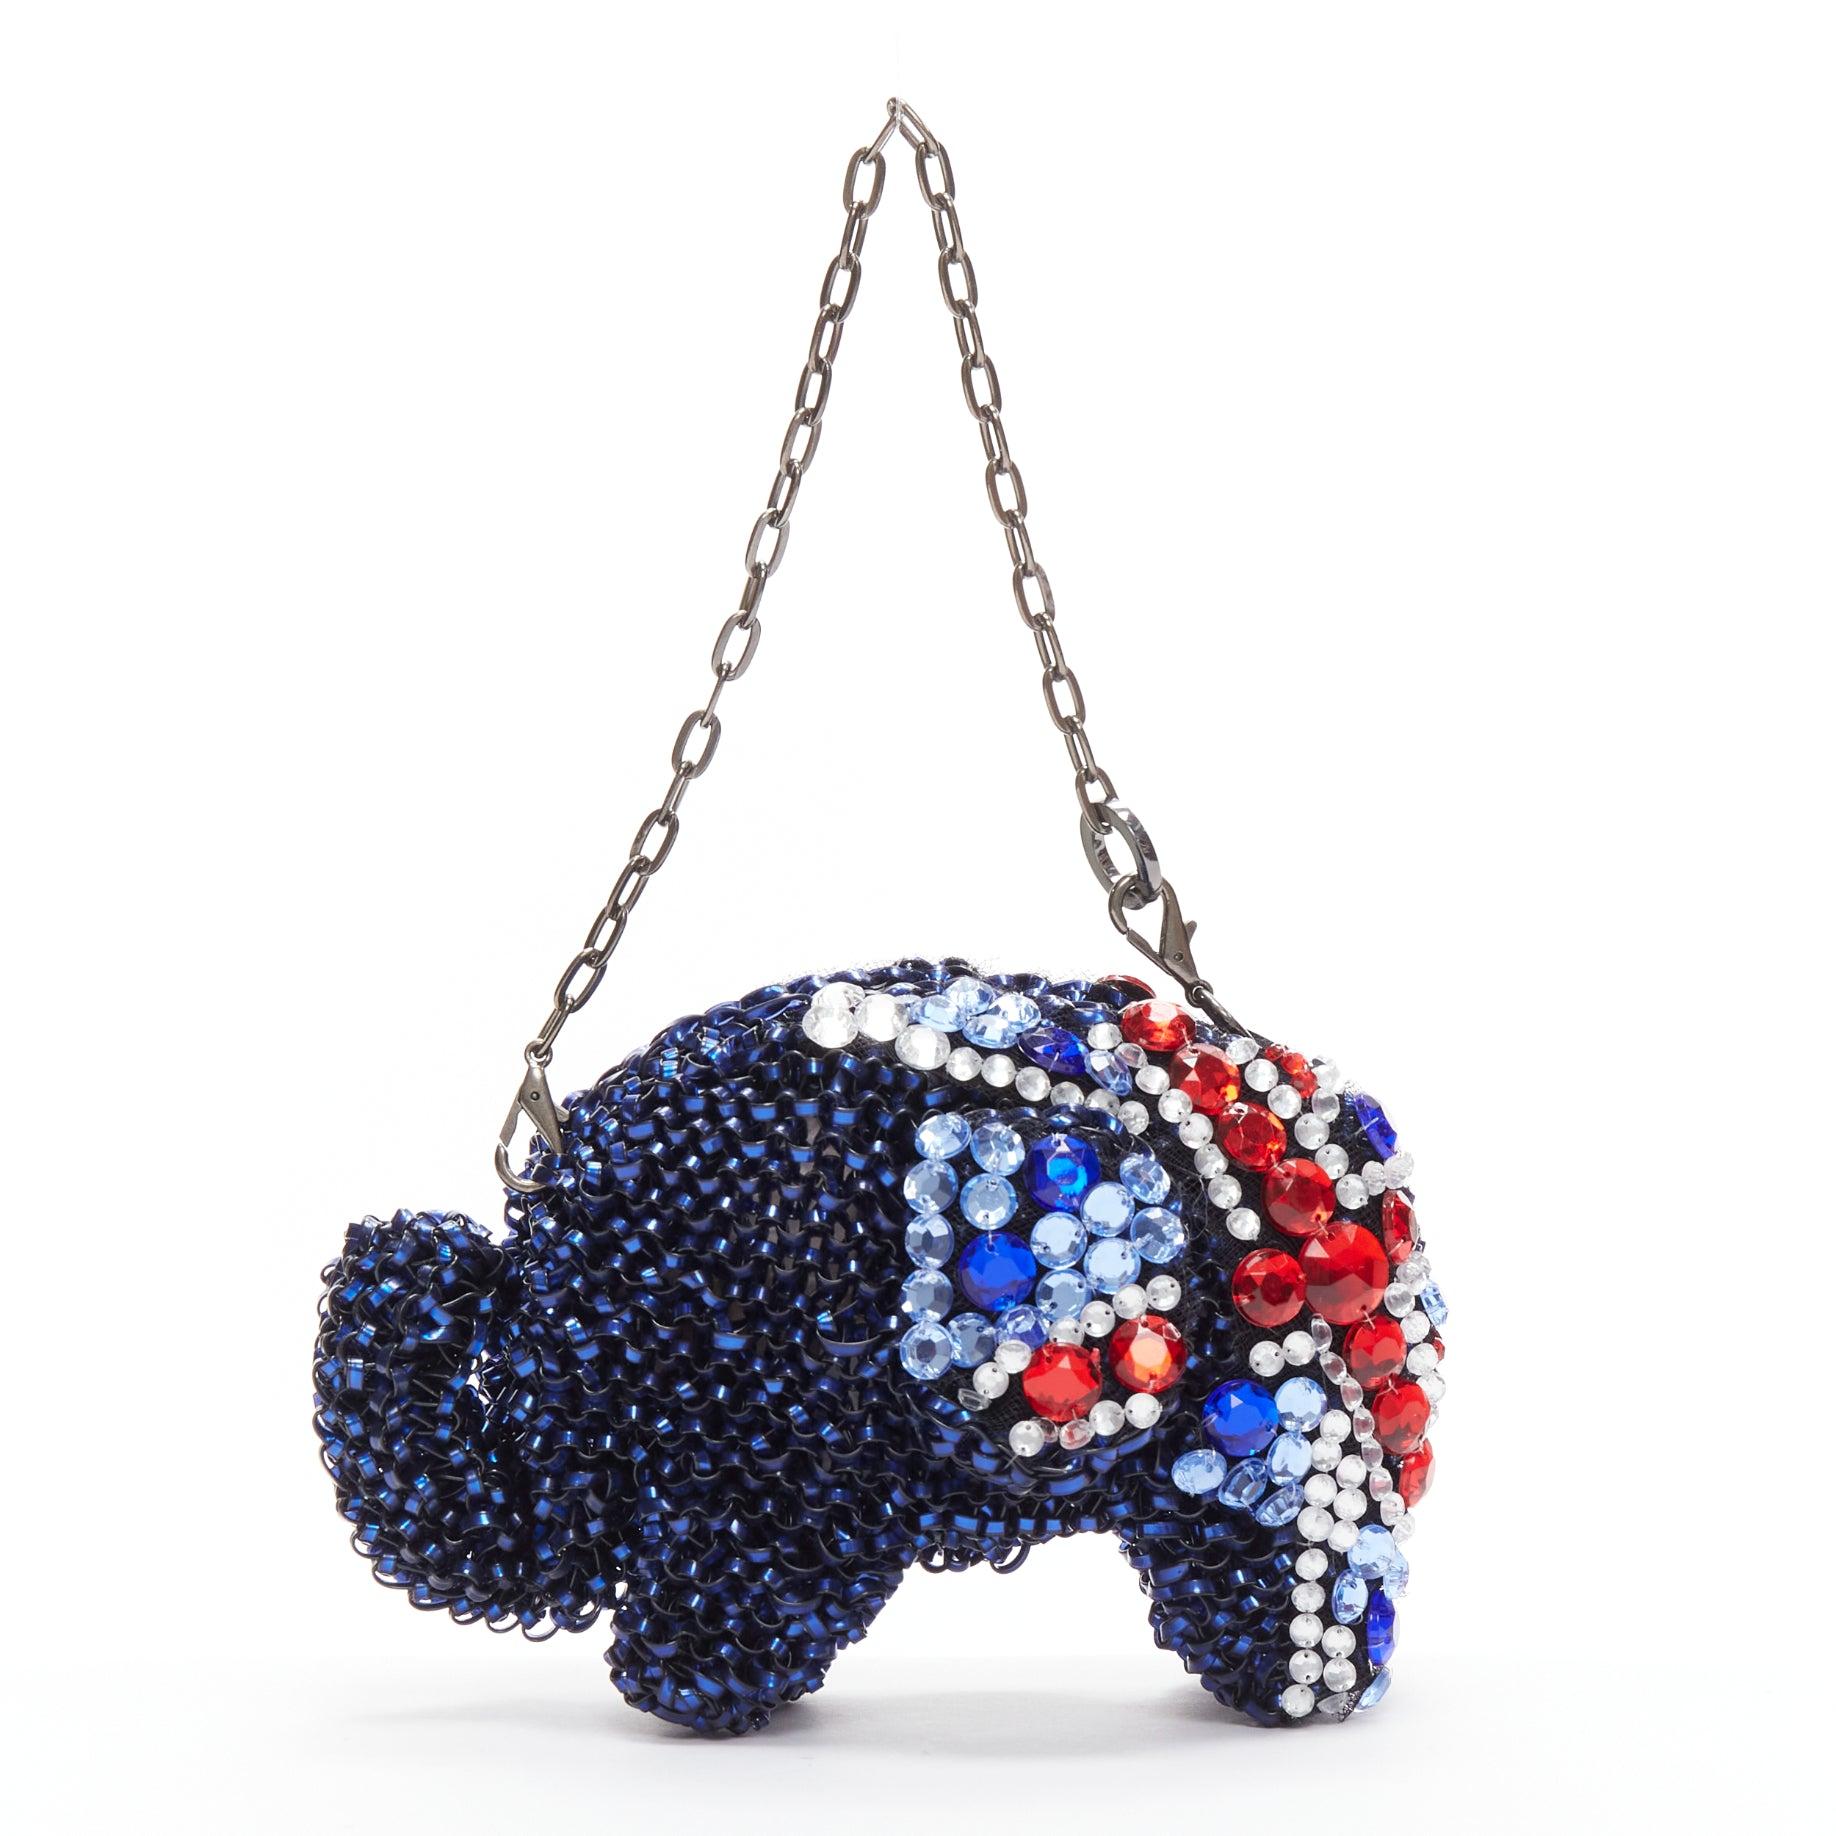 rare ANTEPRIMA Wire Bag blue red crystal Union Jack elephant clutch For Sale 1